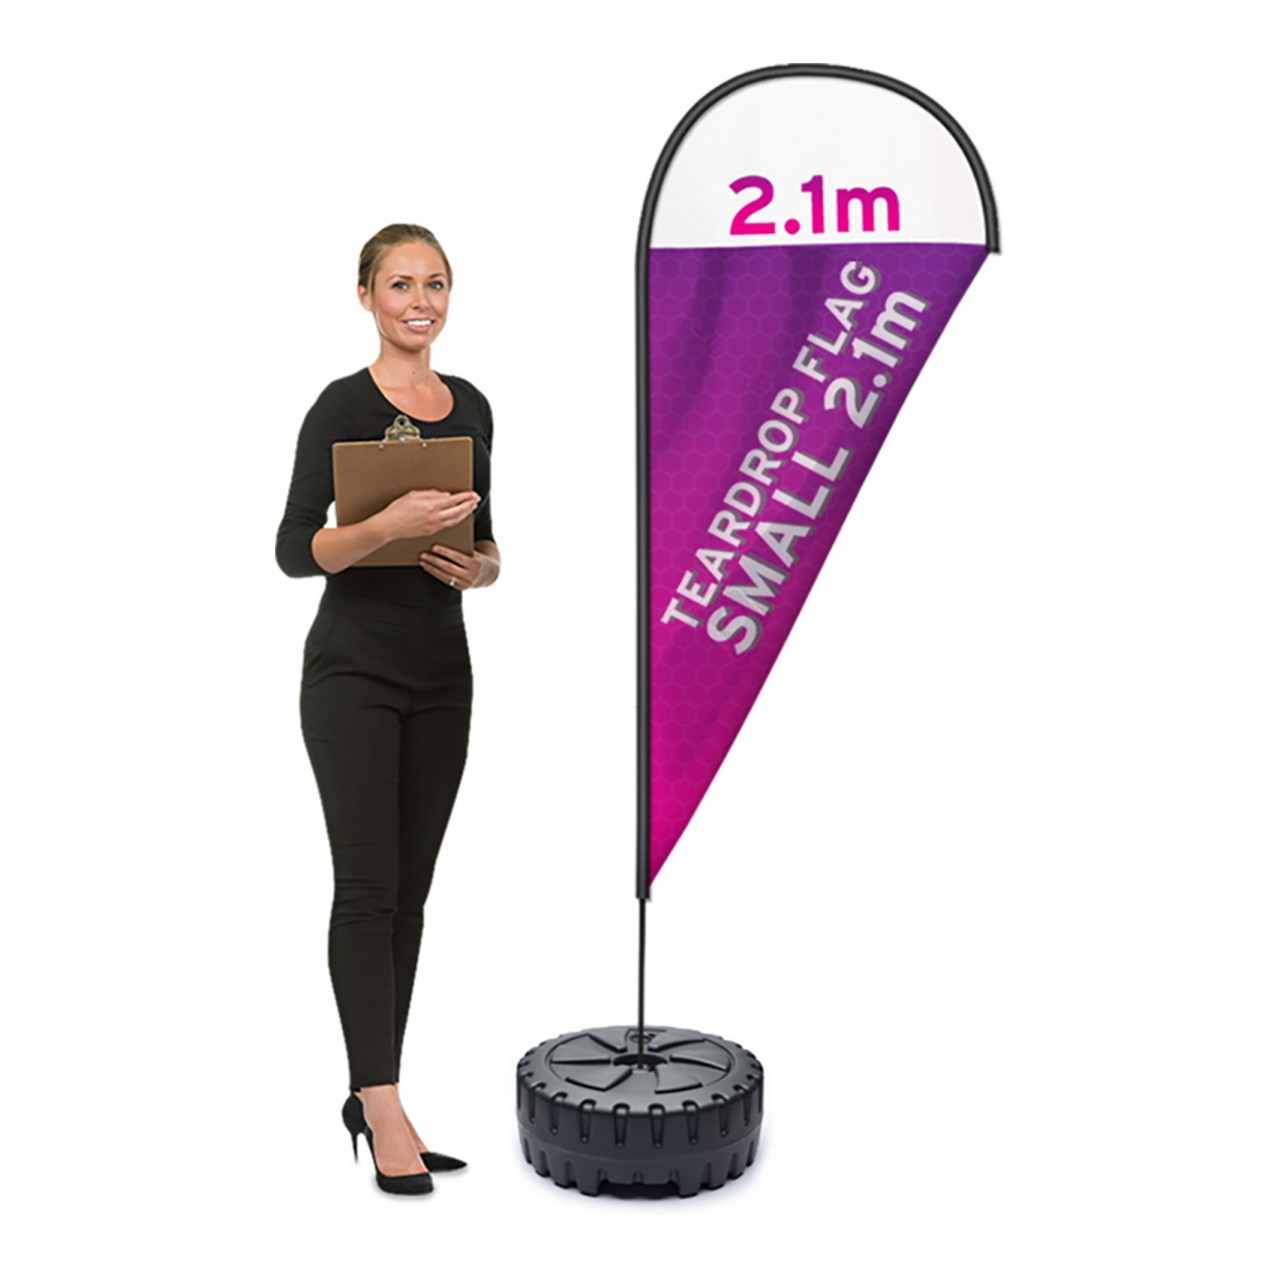 Teardrop Promotional Flag 2.1m Small with Best Selling Large Water Base